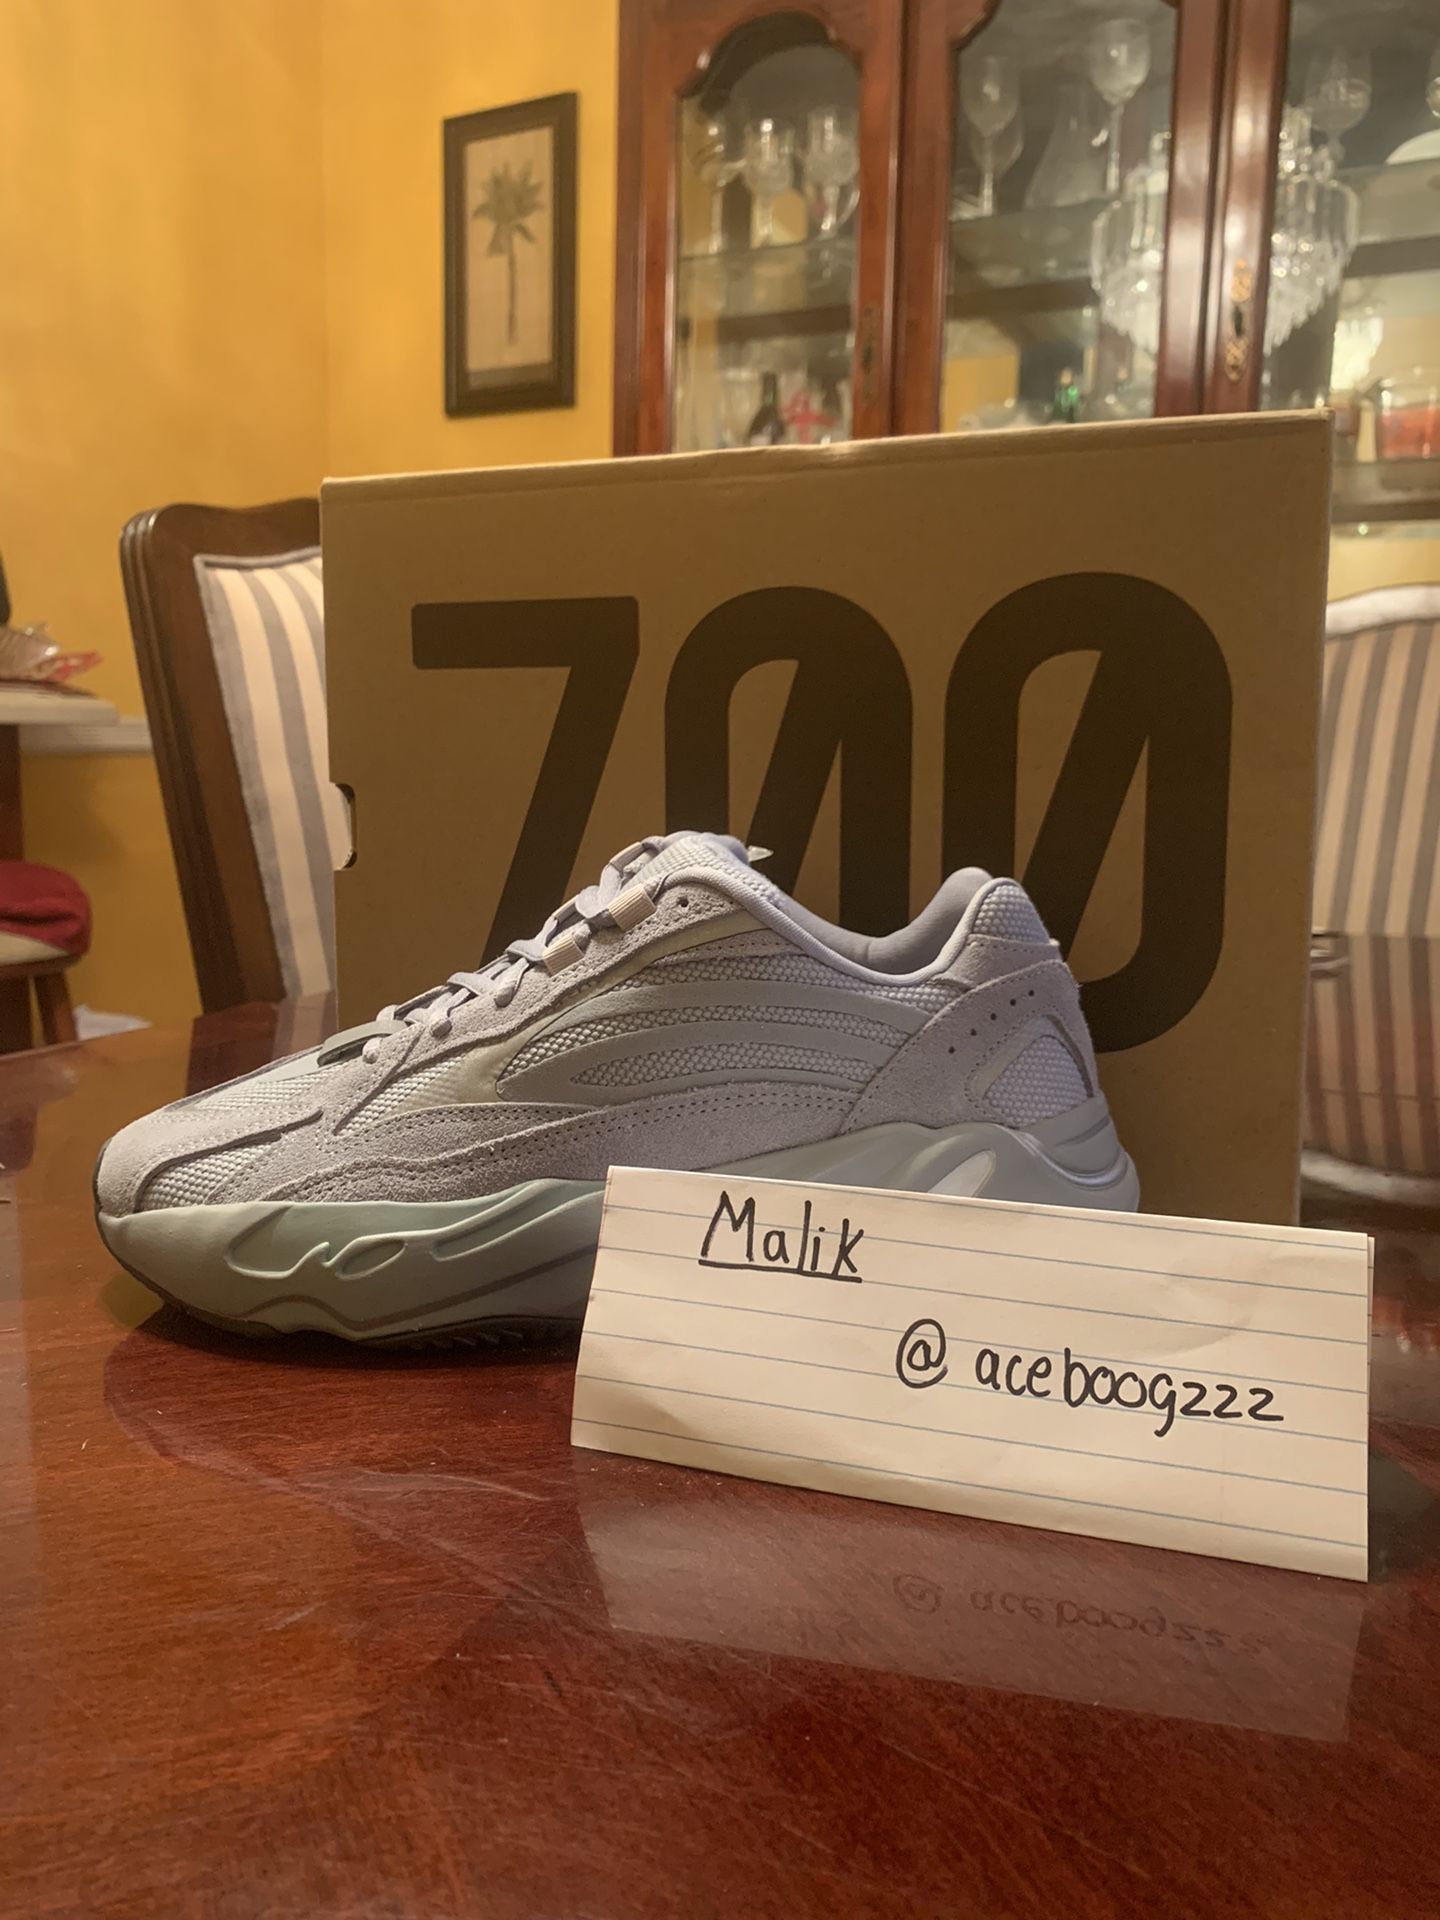 Adidas YEEZY BOOST 700 V2 "Hospital Blue" size 7 DS/Brand New